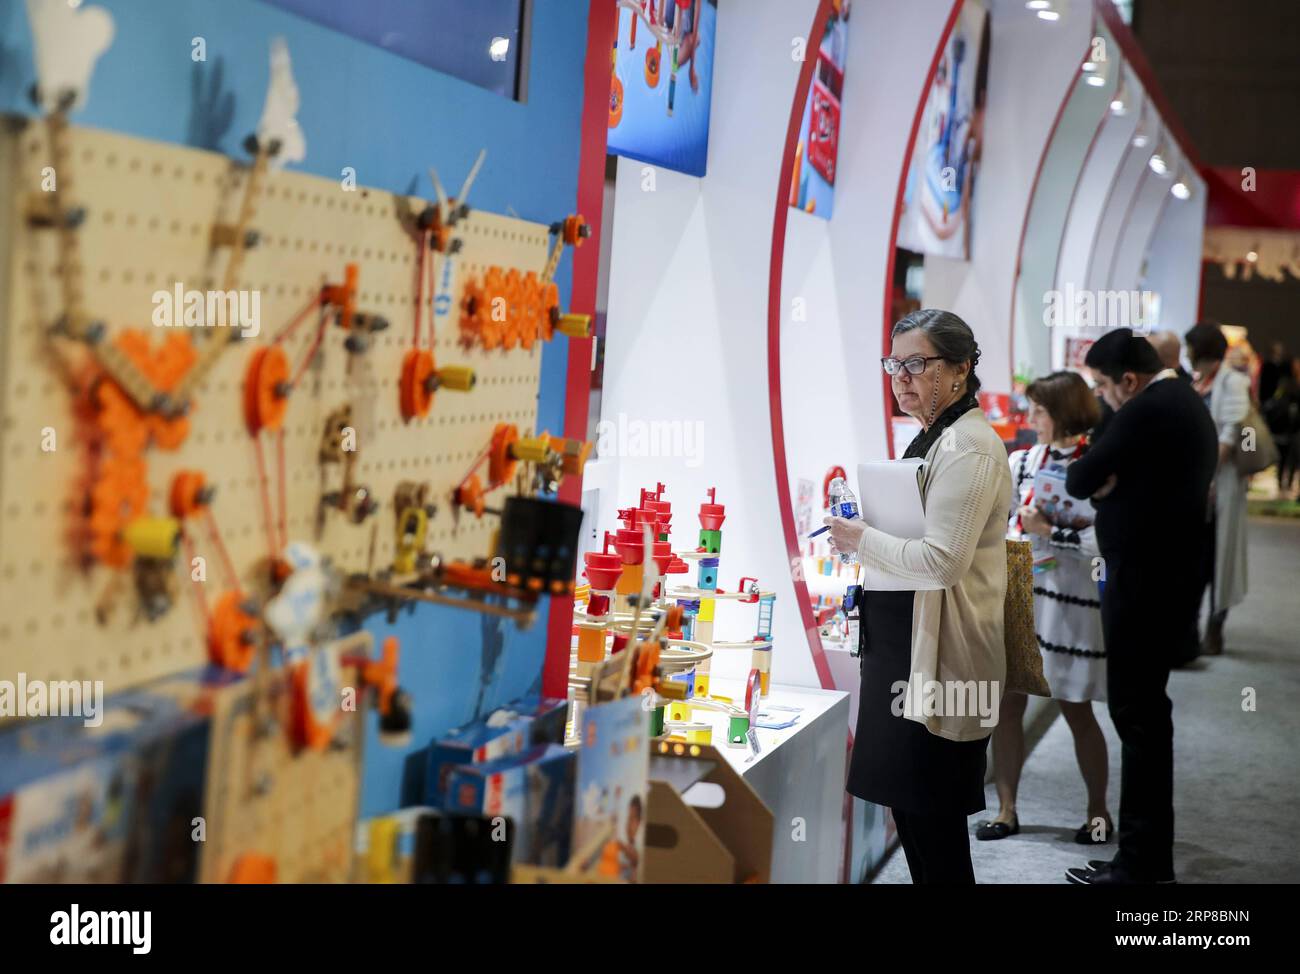 (190226) -- BEIJING, Feb. 26, 2019 -- Visitors look at toy products at the booth of Hape Toys during the 116th Annual North American International Toy Fair at the Jacob K. Javits Convention Center in New York, the United States, on Feb. 18, 2019. ) Xinhua headlines: More fun toys, no painful tariffs: American toymakers hopeful on U.S.-China trade deal WangxYing PUBLICATIONxNOTxINxCHN Stock Photo